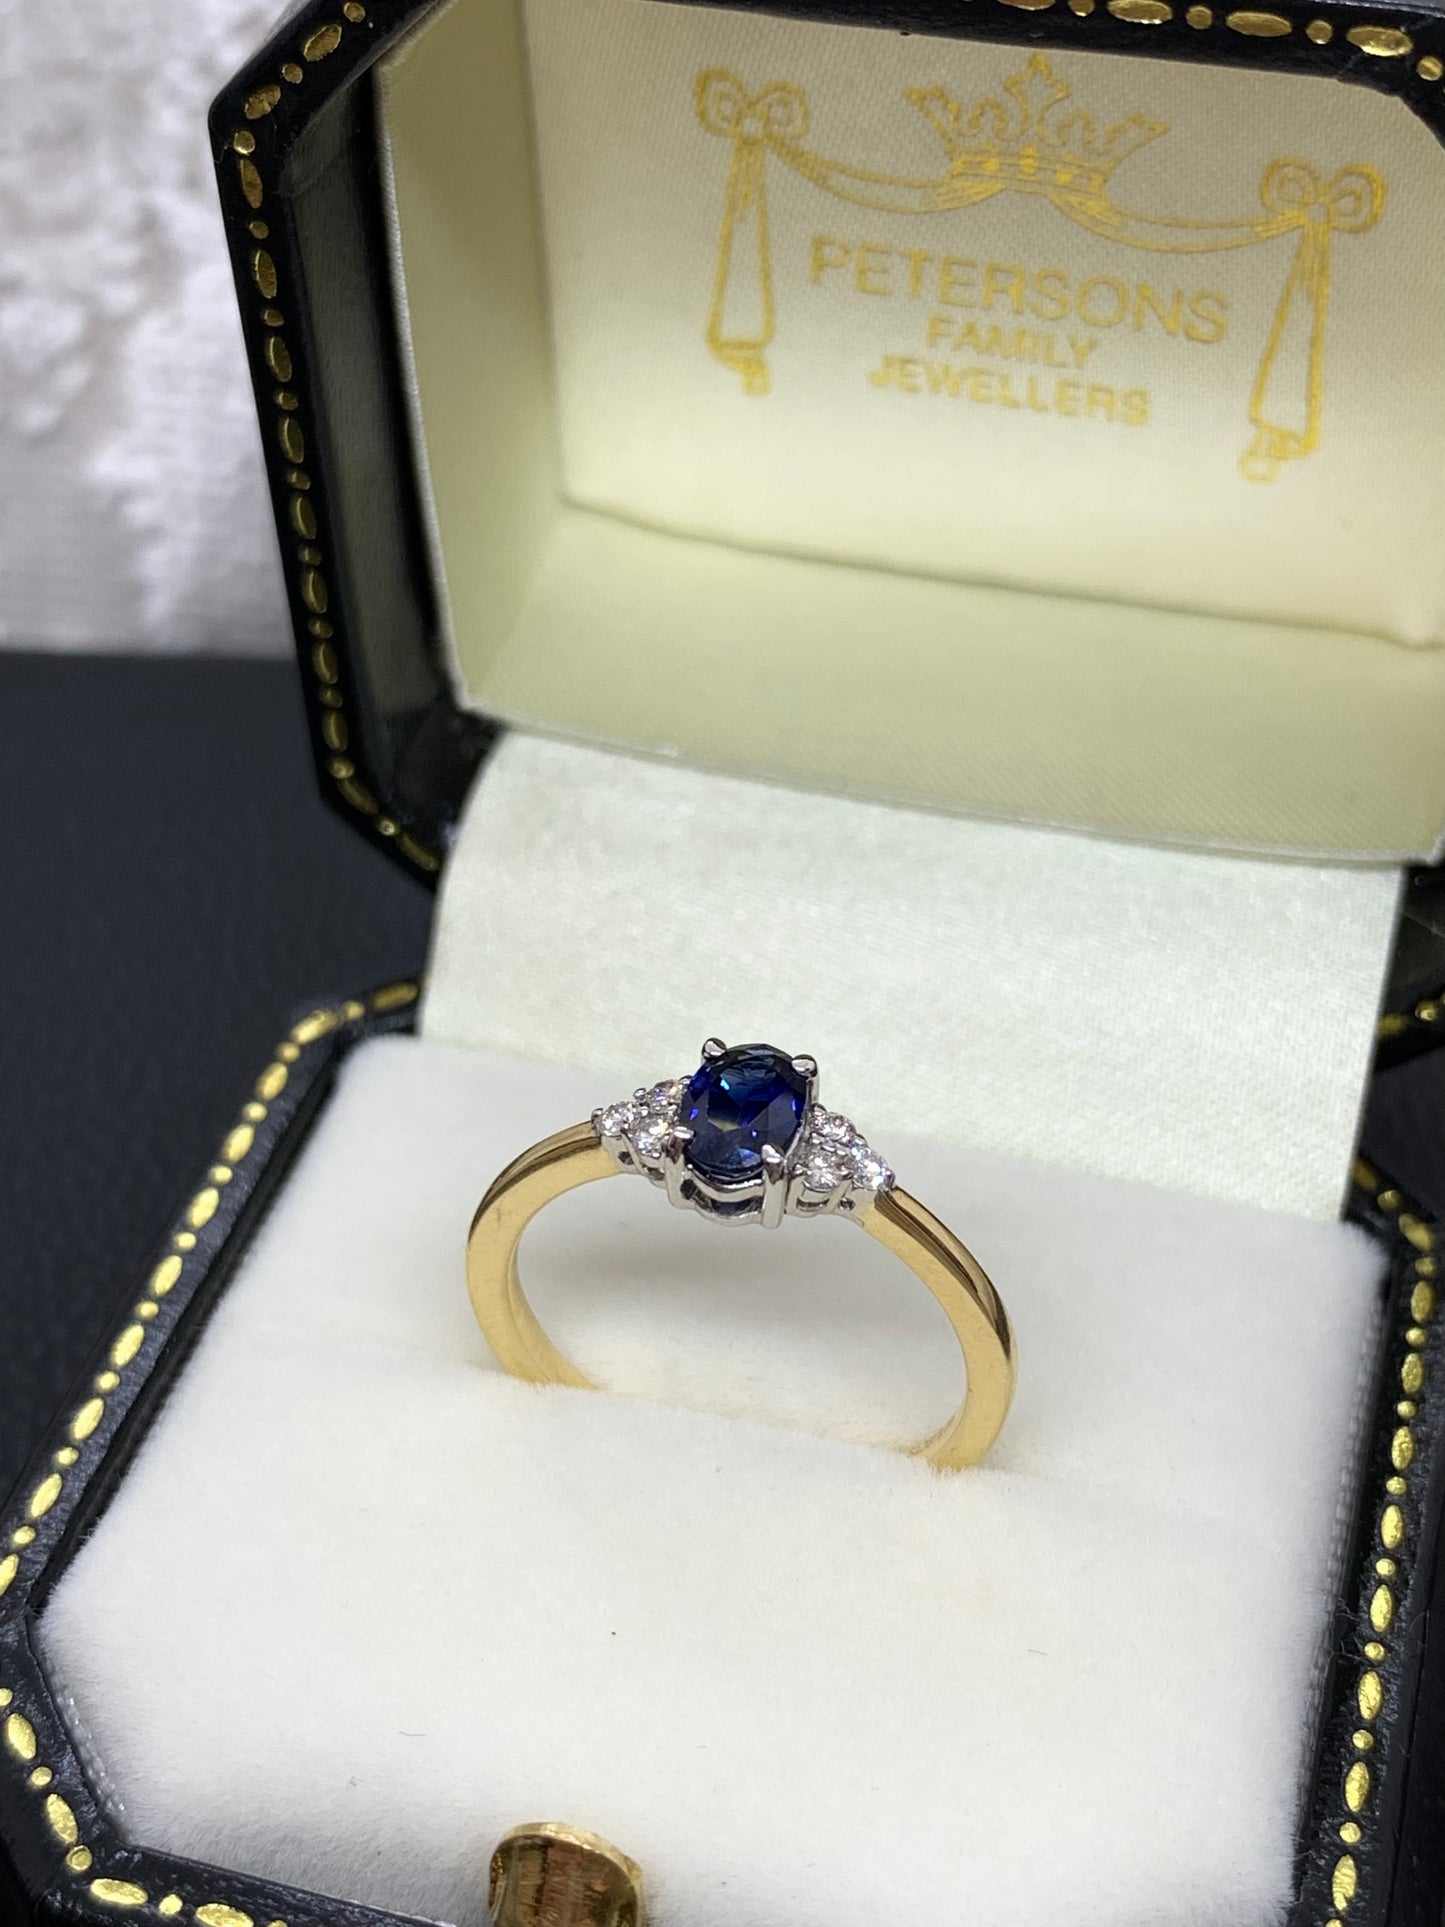 18ct Gold Sapphire and Diamond Engagement Ring.